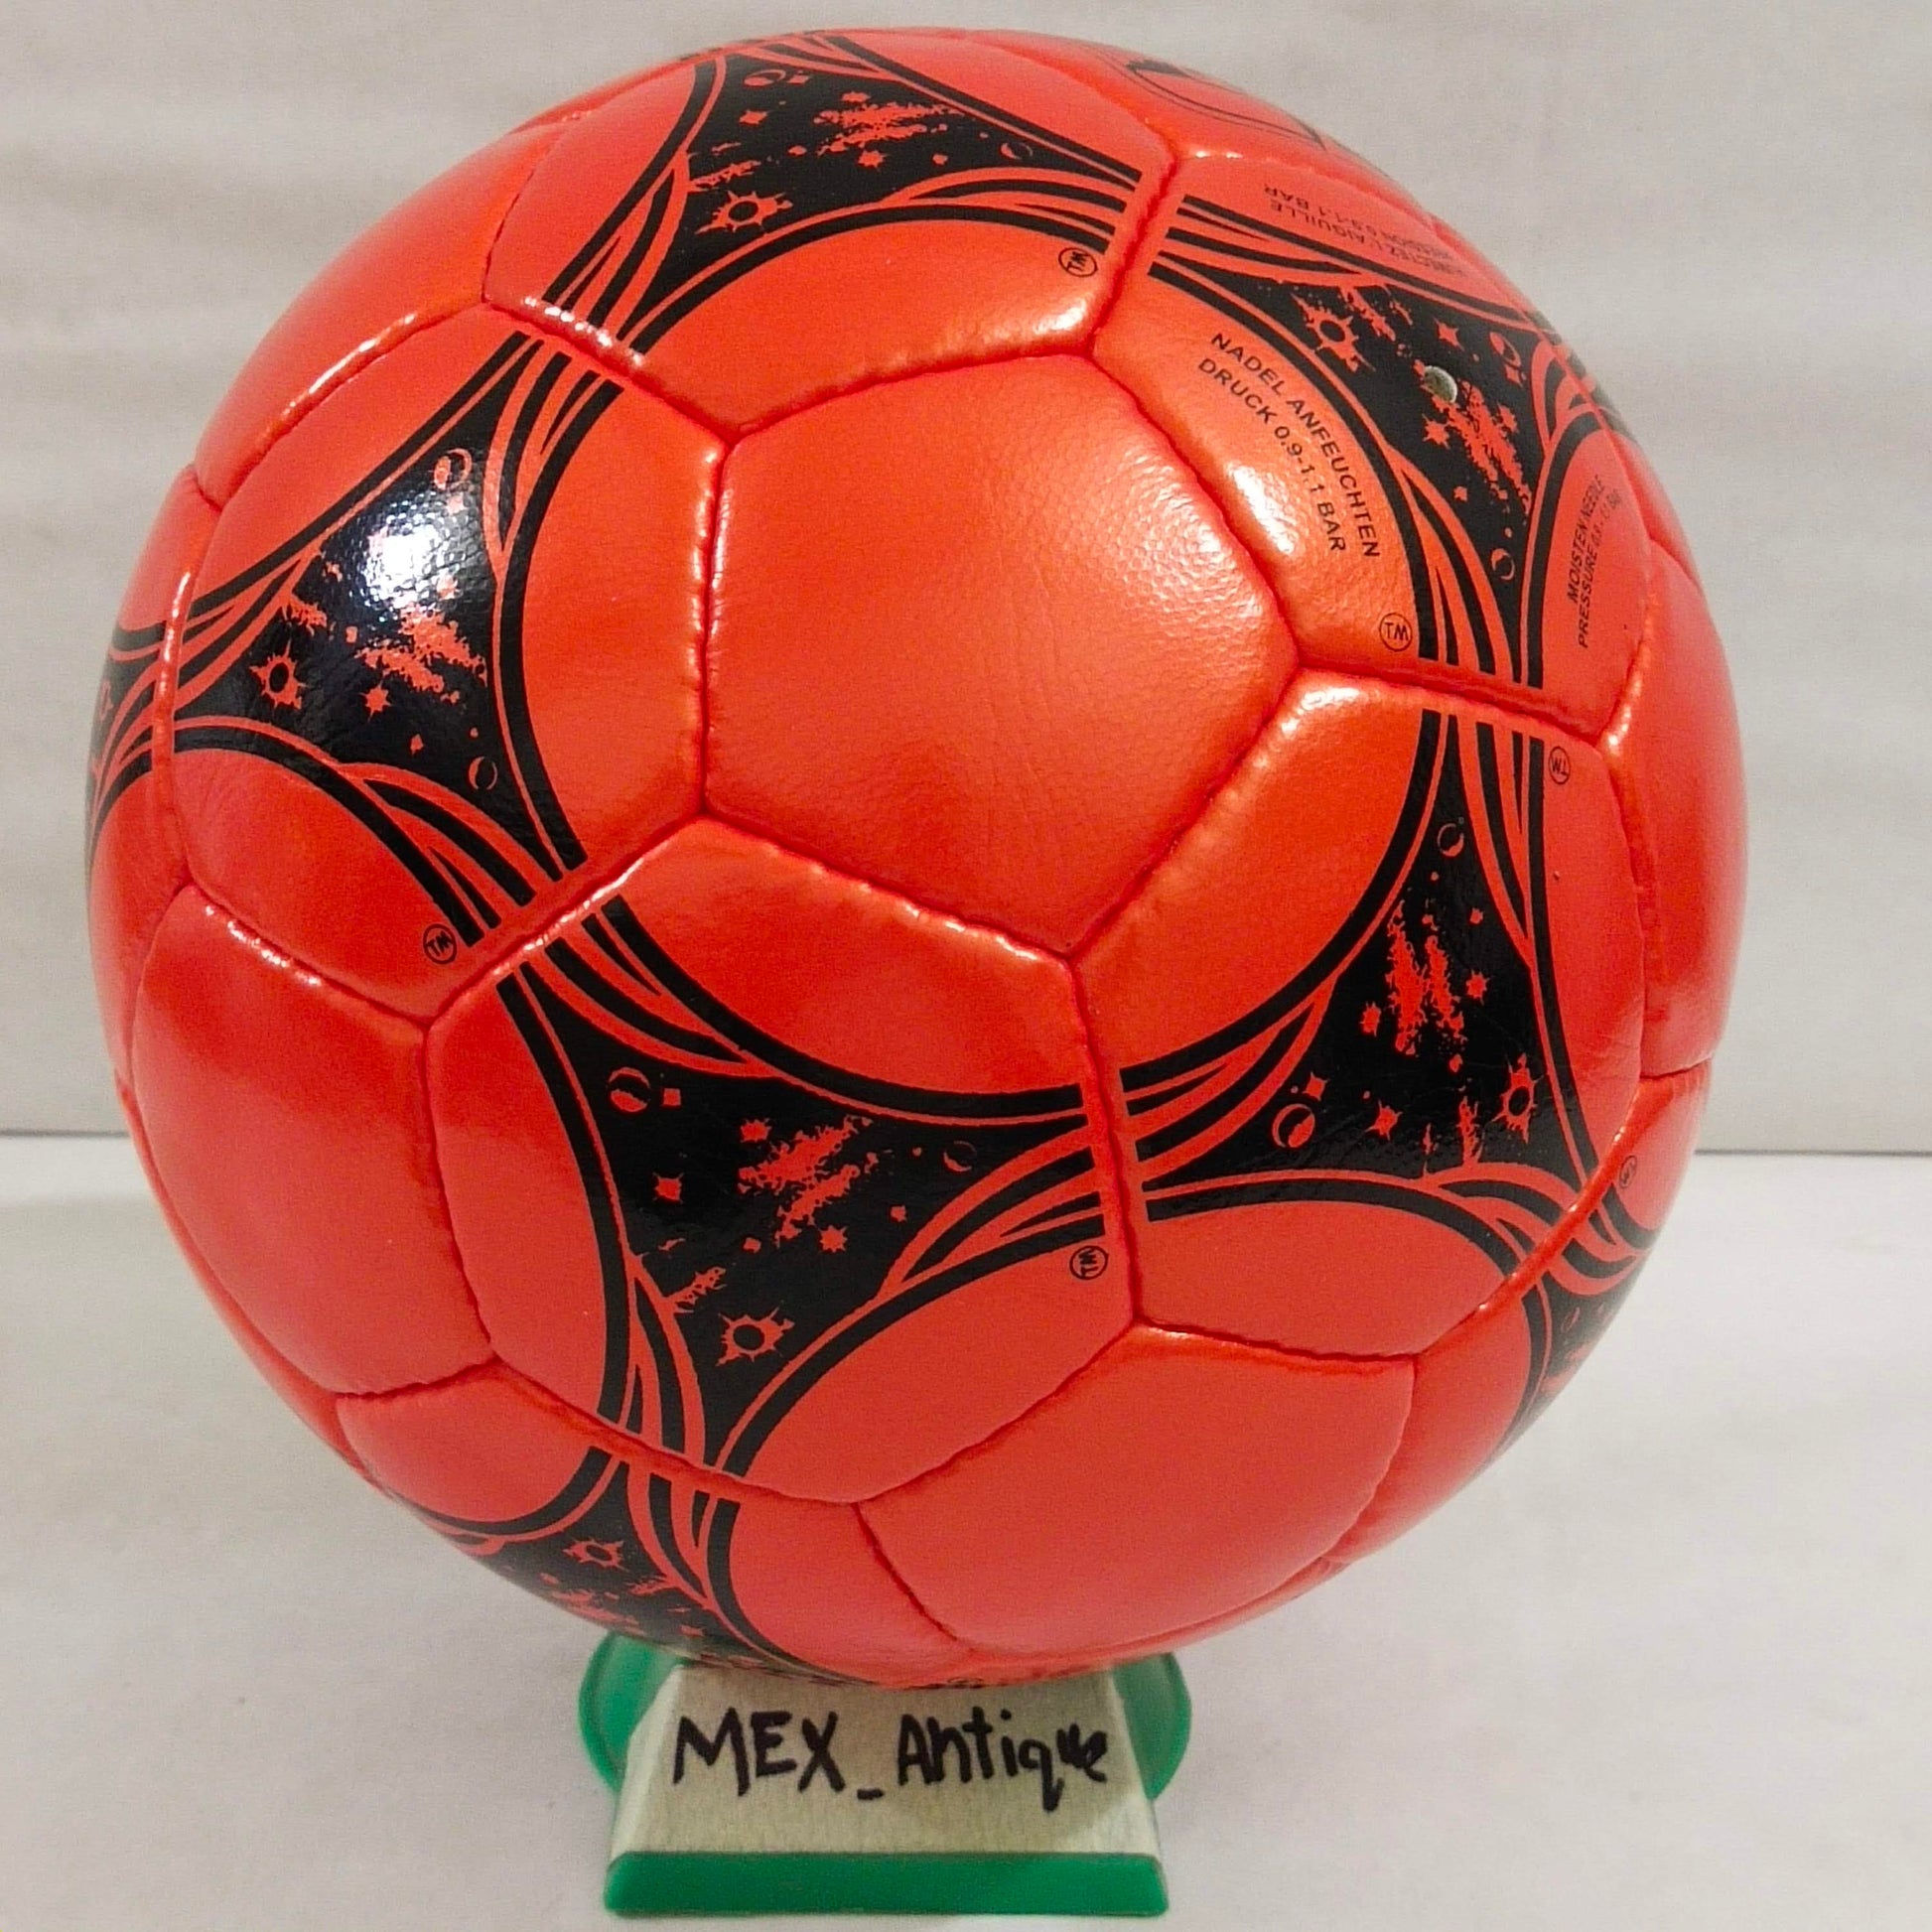 Adidas Questra | FIFA World Cup 1994 | Official Winter Ball | SIZE 5 05